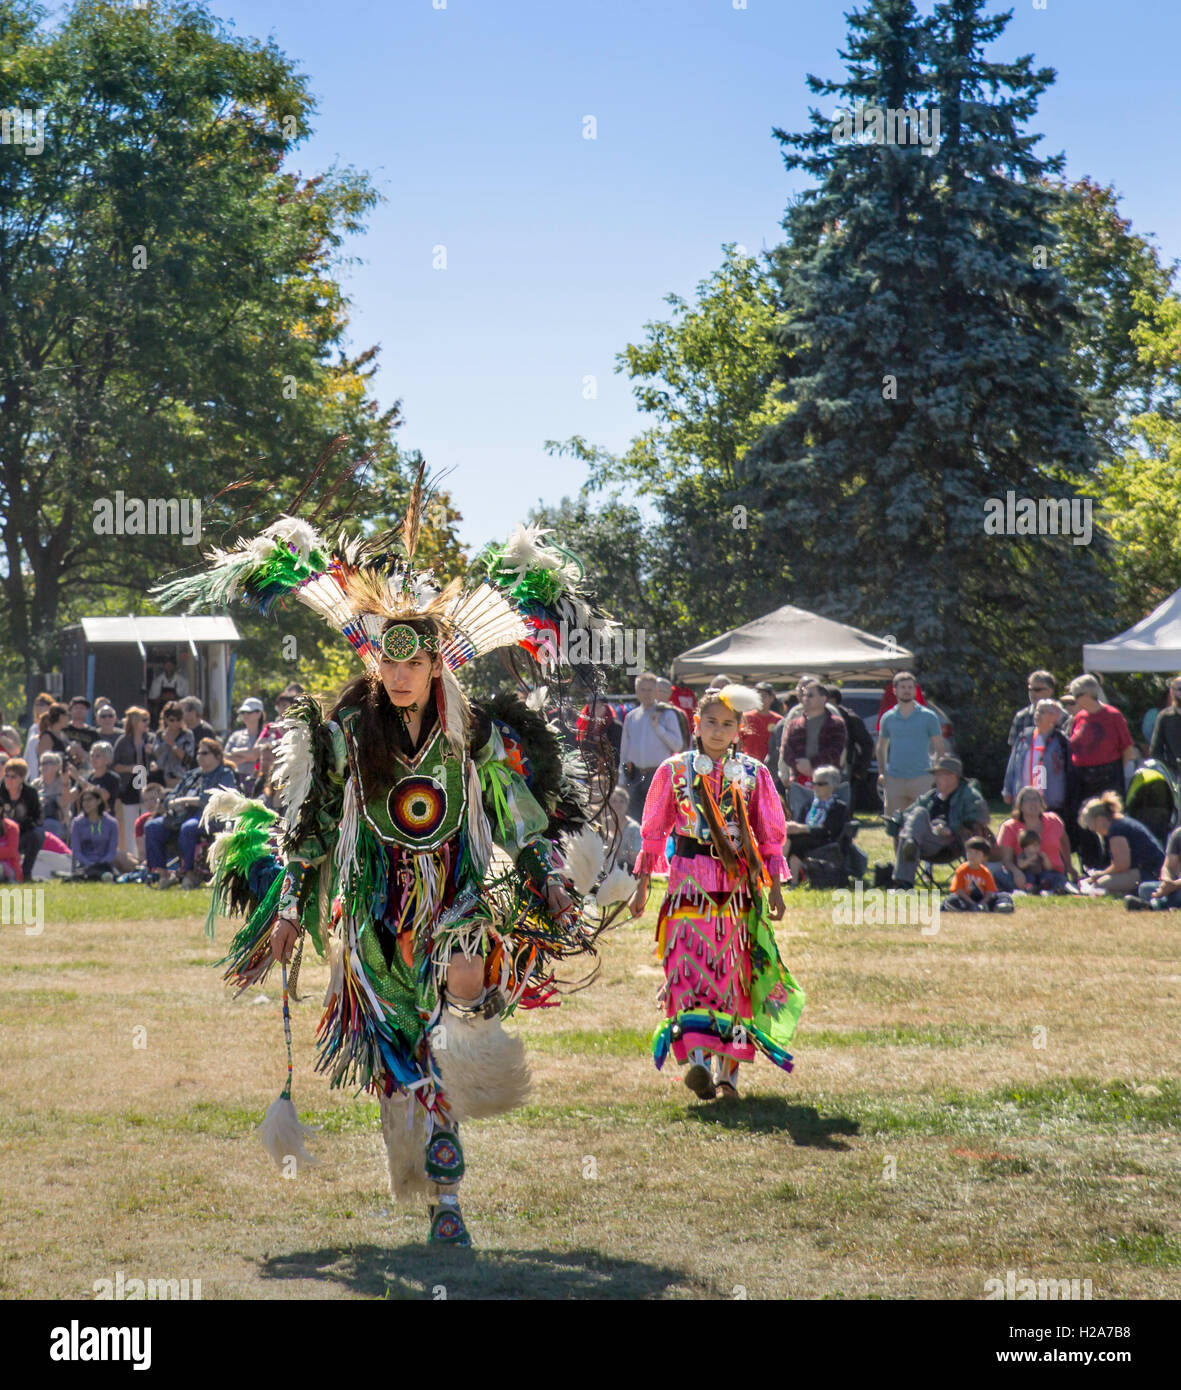 Dancers in full native costume dance to the beat of drums in the 13th annual pow wow at Waterloo Park, Waterloo, Canada. Stock Photo